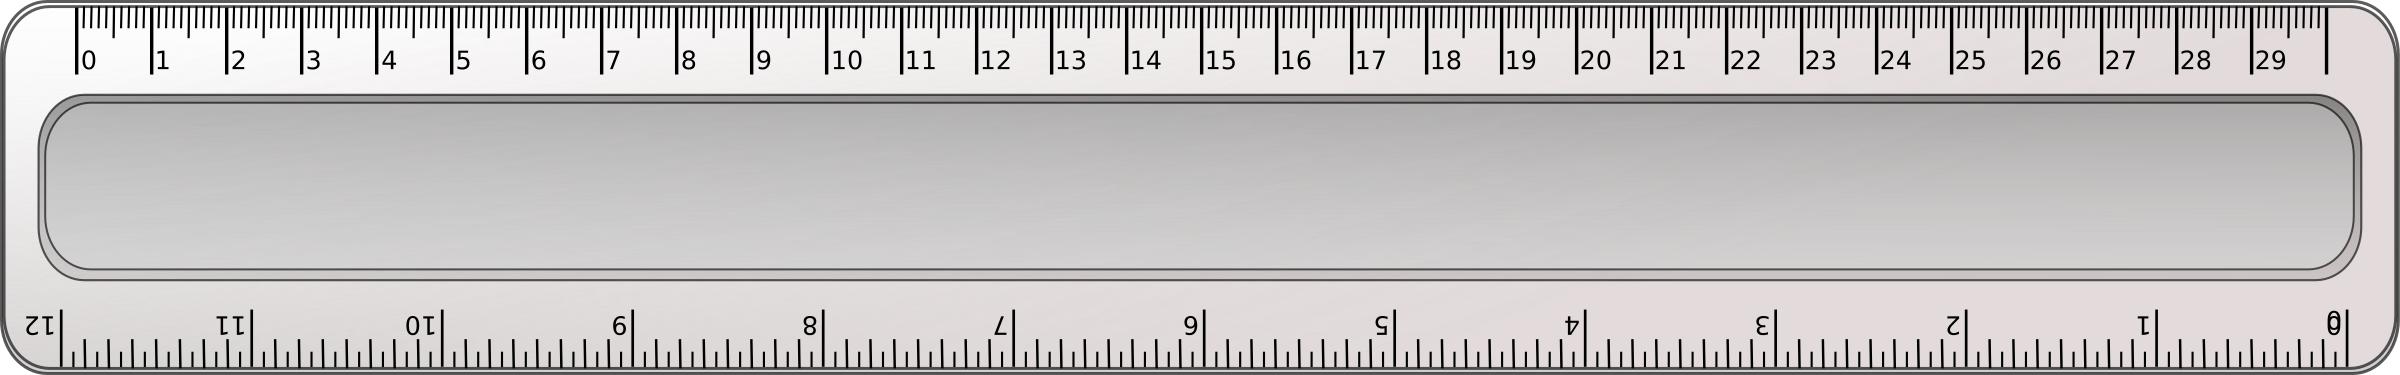 ruler(without URL) png